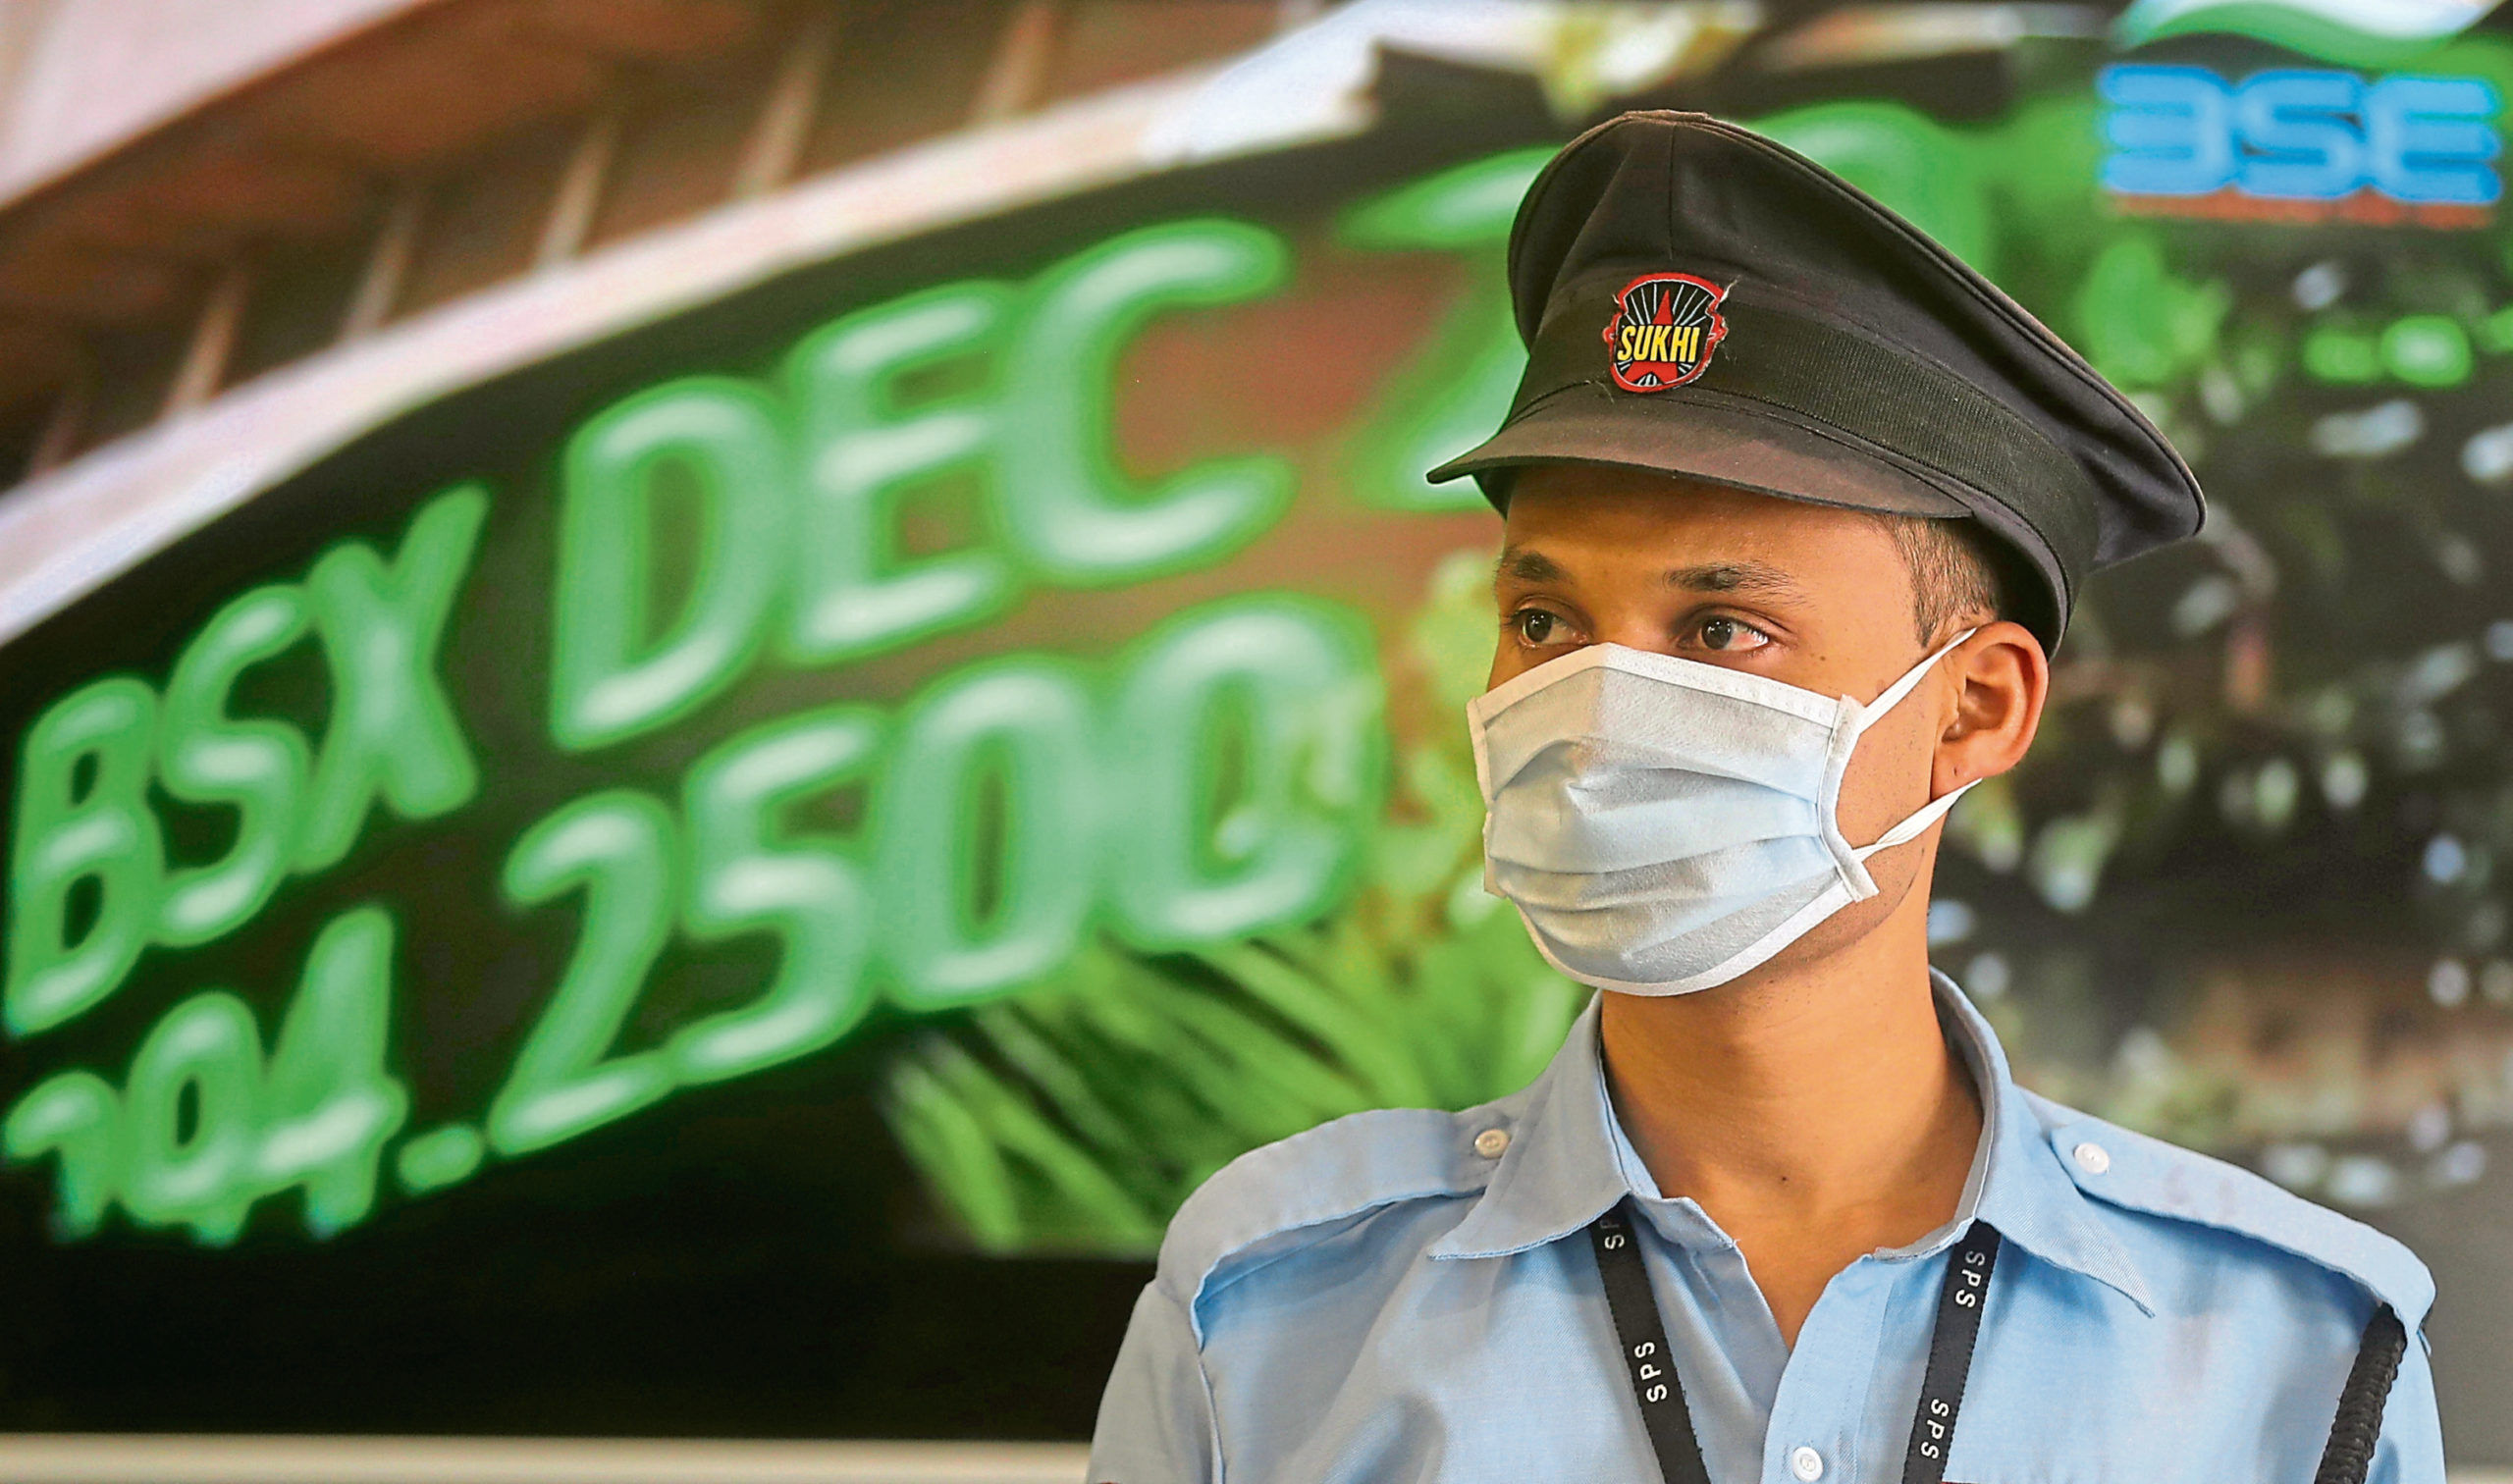 A security guard wearing a mask as a precaution against the new coronavirus stands at the Bombay Stock Exchange (BSE) building in Mumbai, in Mumbai, India, Monday, March 16, 2020. For most people, the new coronavirus causes only mild or moderate symptoms. For some, it can cause more severe illness, especially in older adults and people with existing health problems. (AP Photo/Rafiq Maqbool)